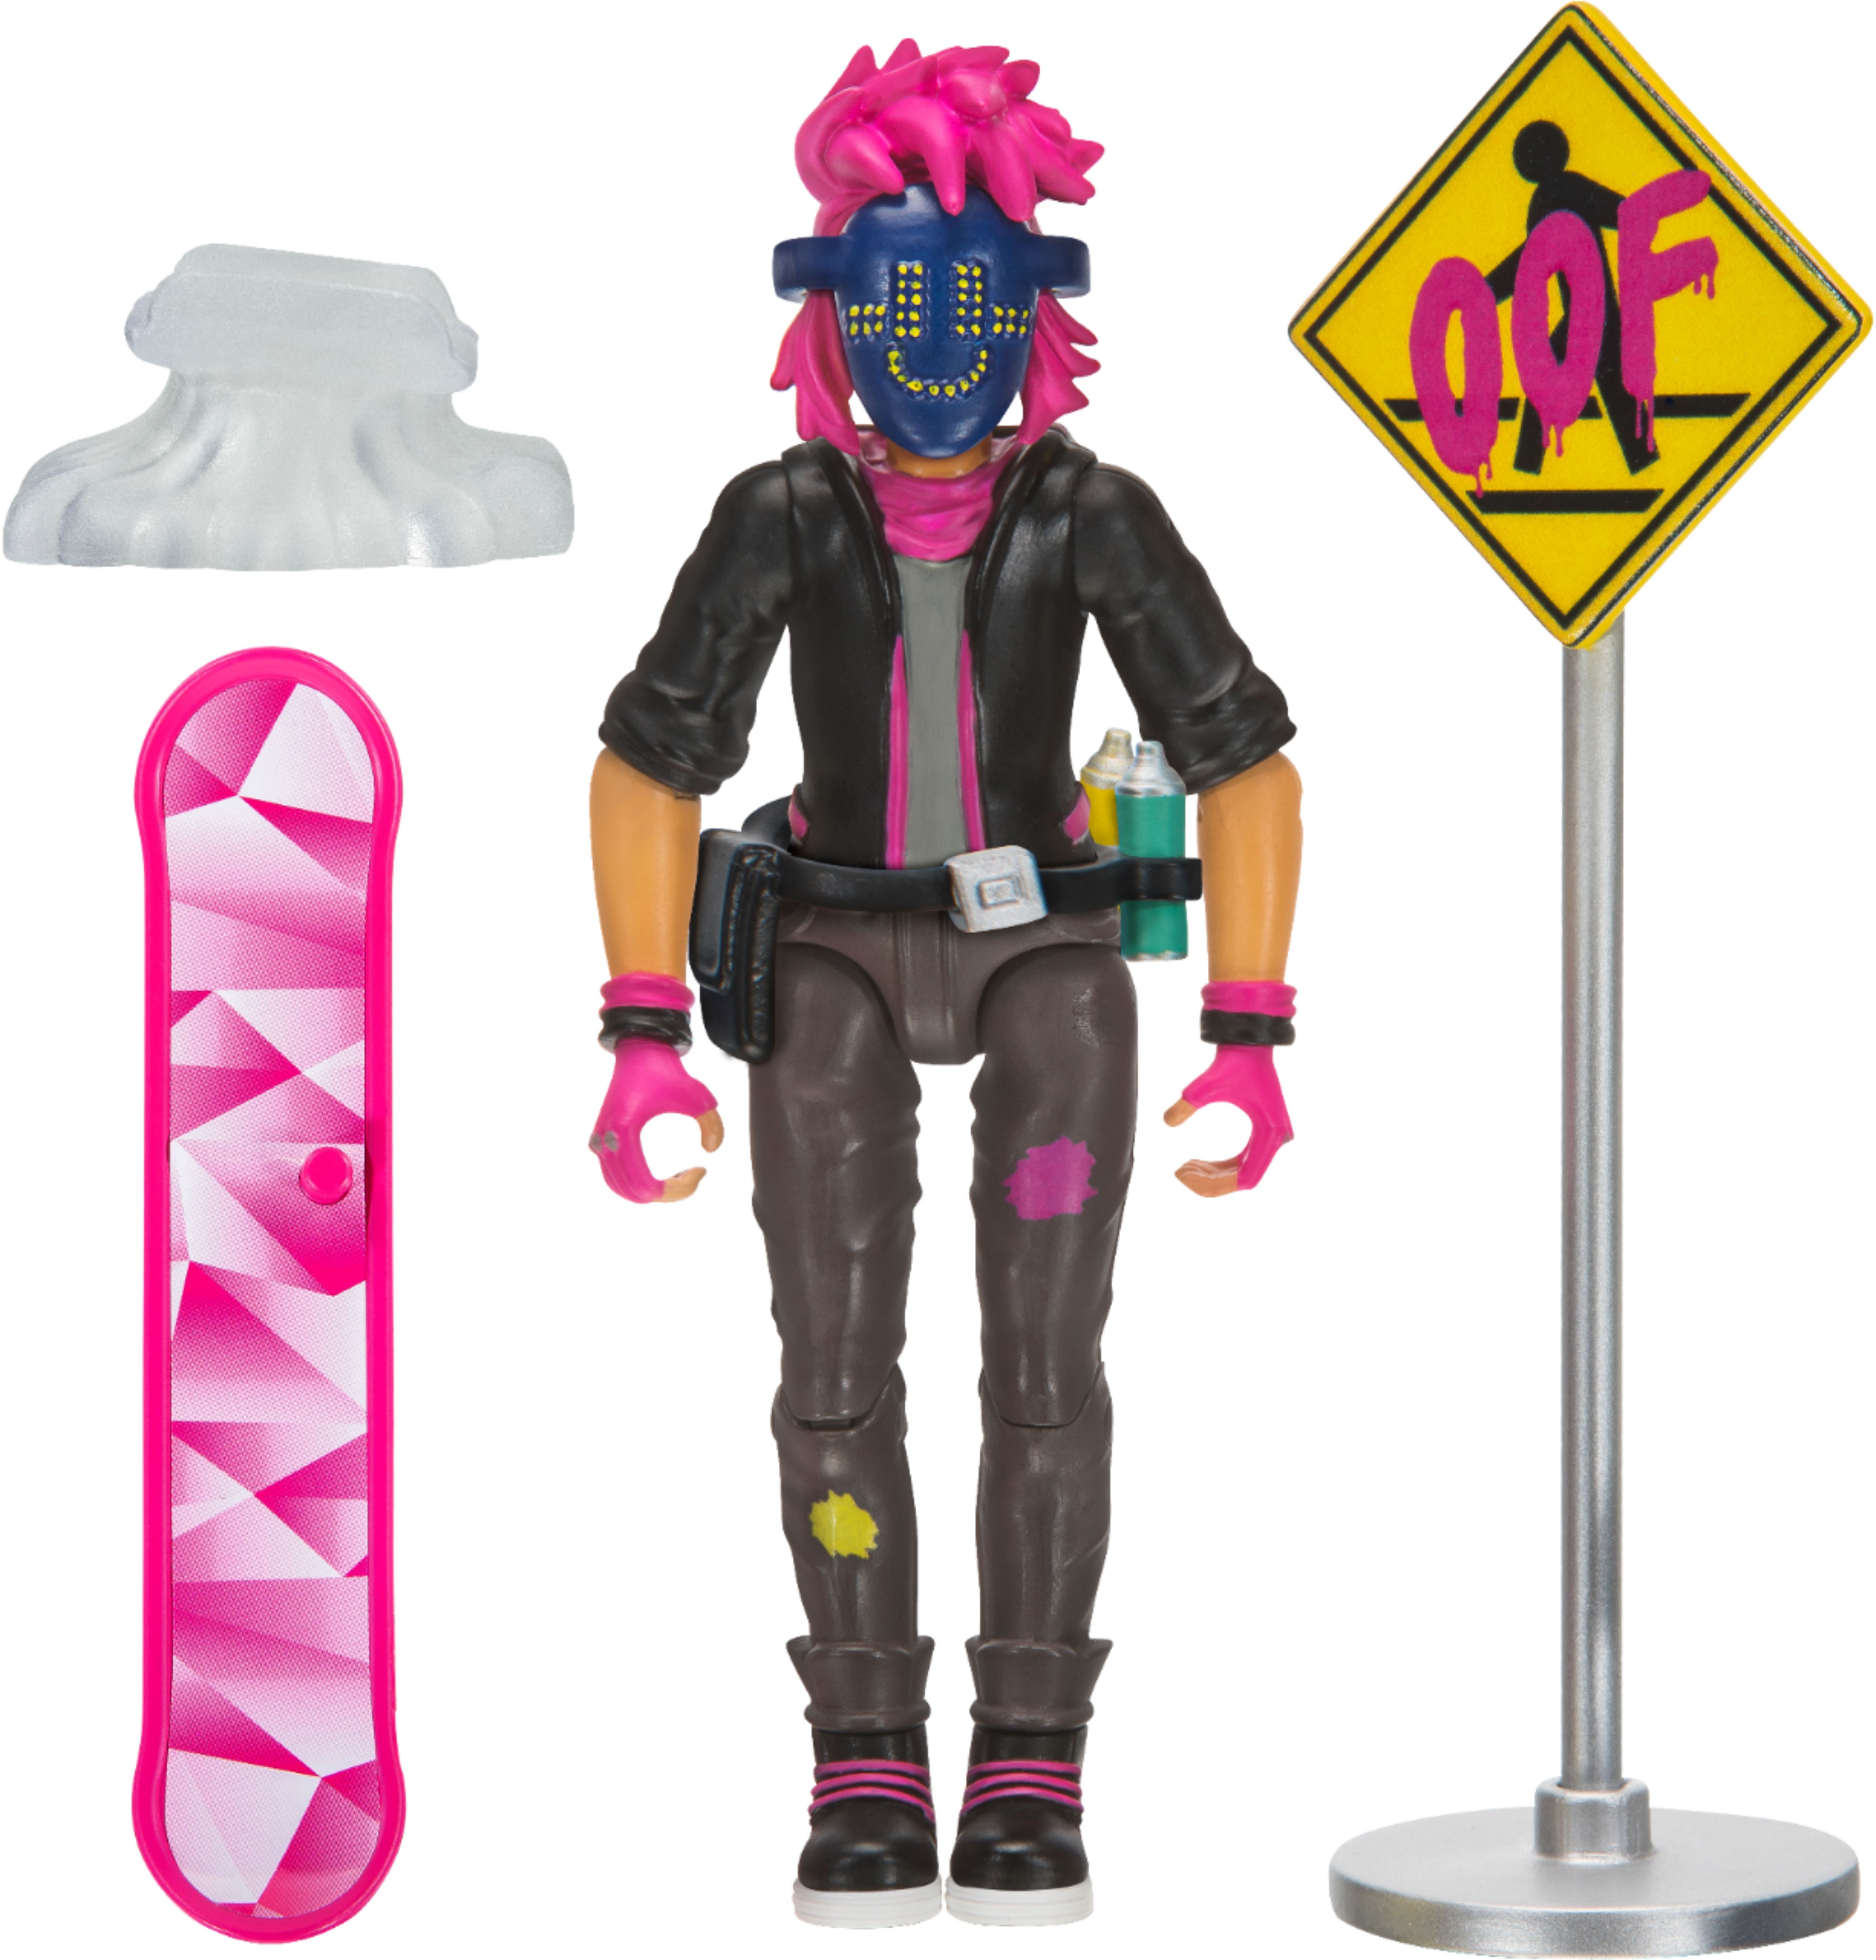 Jazwares Roblox Imagination Articulated Figure Styles May Vary Rob0268 Best Buy - details about roblox blue lazer parkour runner mix match parts jazwares 2 inch figure